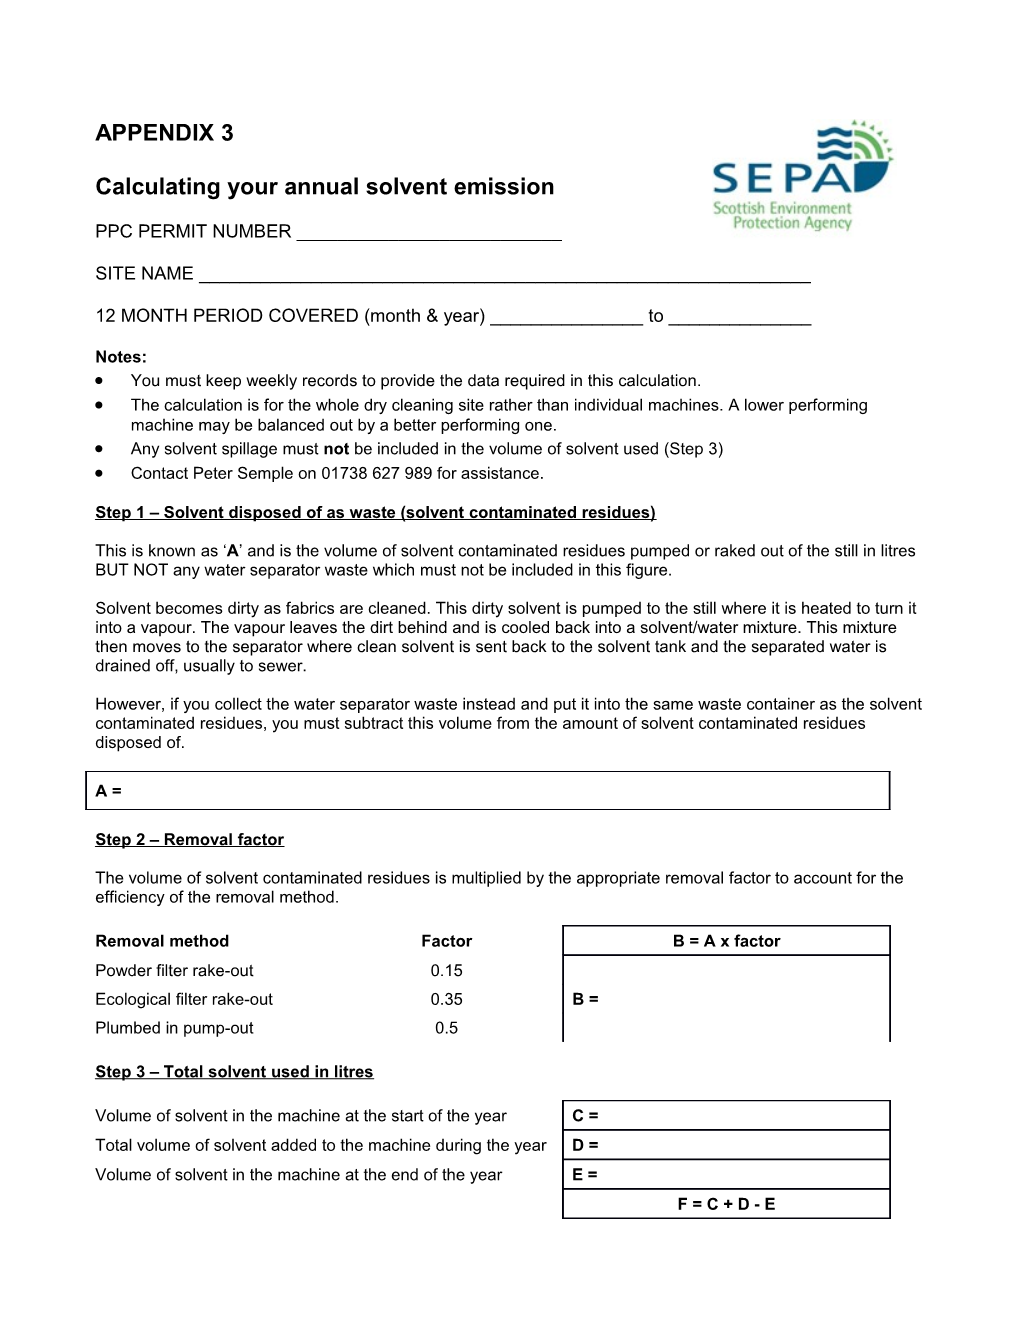 Calculating Your Annual Solvent Emission